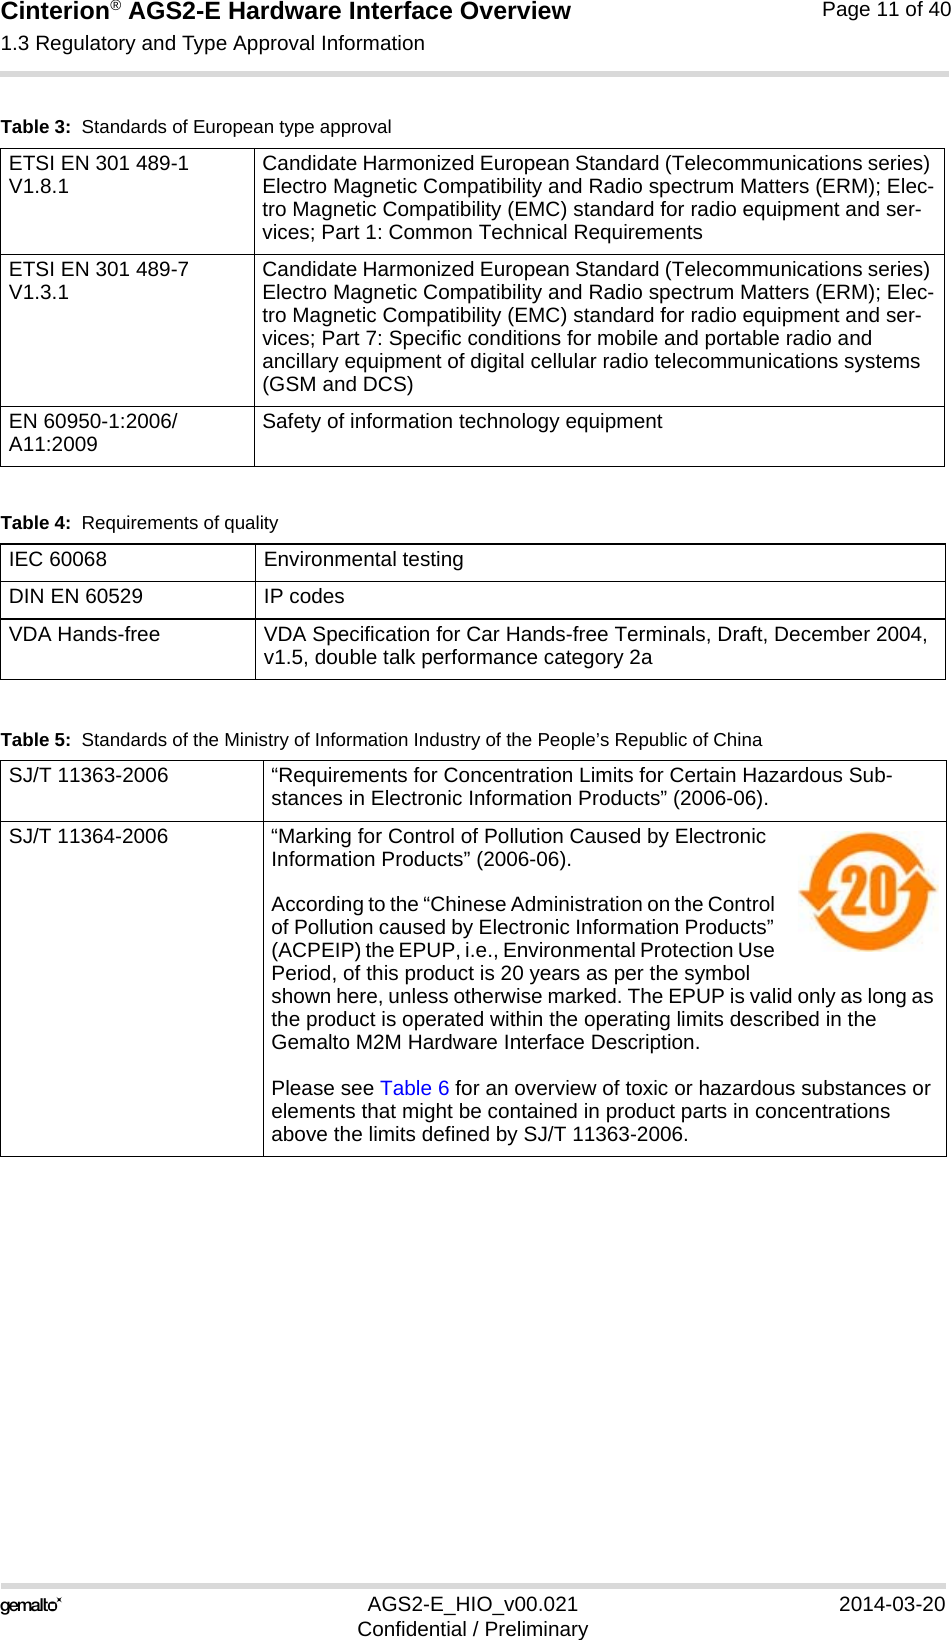 Cinterion® AGS2-E Hardware Interface Overview1.3 Regulatory and Type Approval Information14AGS2-E_HIO_v00.021 2014-03-20Confidential / PreliminaryPage 11 of 40ETSI EN 301 489-1 V1.8.1 Candidate Harmonized European Standard (Telecommunications series) Electro Magnetic Compatibility and Radio spectrum Matters (ERM); Elec-tro Magnetic Compatibility (EMC) standard for radio equipment and ser-vices; Part 1: Common Technical RequirementsETSI EN 301 489-7 V1.3.1 Candidate Harmonized European Standard (Telecommunications series) Electro Magnetic Compatibility and Radio spectrum Matters (ERM); Elec-tro Magnetic Compatibility (EMC) standard for radio equipment and ser-vices; Part 7: Specific conditions for mobile and portable radio and ancillary equipment of digital cellular radio telecommunications systems (GSM and DCS)EN 60950-1:2006/A11:2009 Safety of information technology equipmentTable 4:  Requirements of qualityIEC 60068 Environmental testingDIN EN 60529 IP codesVDA Hands-free VDA Specification for Car Hands-free Terminals, Draft, December 2004, v1.5, double talk performance category 2aTable 5:  Standards of the Ministry of Information Industry of the People’s Republic of ChinaSJ/T 11363-2006  “Requirements for Concentration Limits for Certain Hazardous Sub-stances in Electronic Information Products” (2006-06).SJ/T 11364-2006 “Marking for Control of Pollution Caused by Electronic Information Products” (2006-06).According to the “Chinese Administration on the Control of Pollution caused by Electronic Information Products” (ACPEIP) the EPUP, i.e., Environmental Protection Use Period, of this product is 20 years as per the symbol shown here, unless otherwise marked. The EPUP is valid only as long as the product is operated within the operating limits described in the Gemalto M2M Hardware Interface Description.Please see Table 6 for an overview of toxic or hazardous substances or elements that might be contained in product parts in concentrations above the limits defined by SJ/T 11363-2006. Table 3:  Standards of European type approval